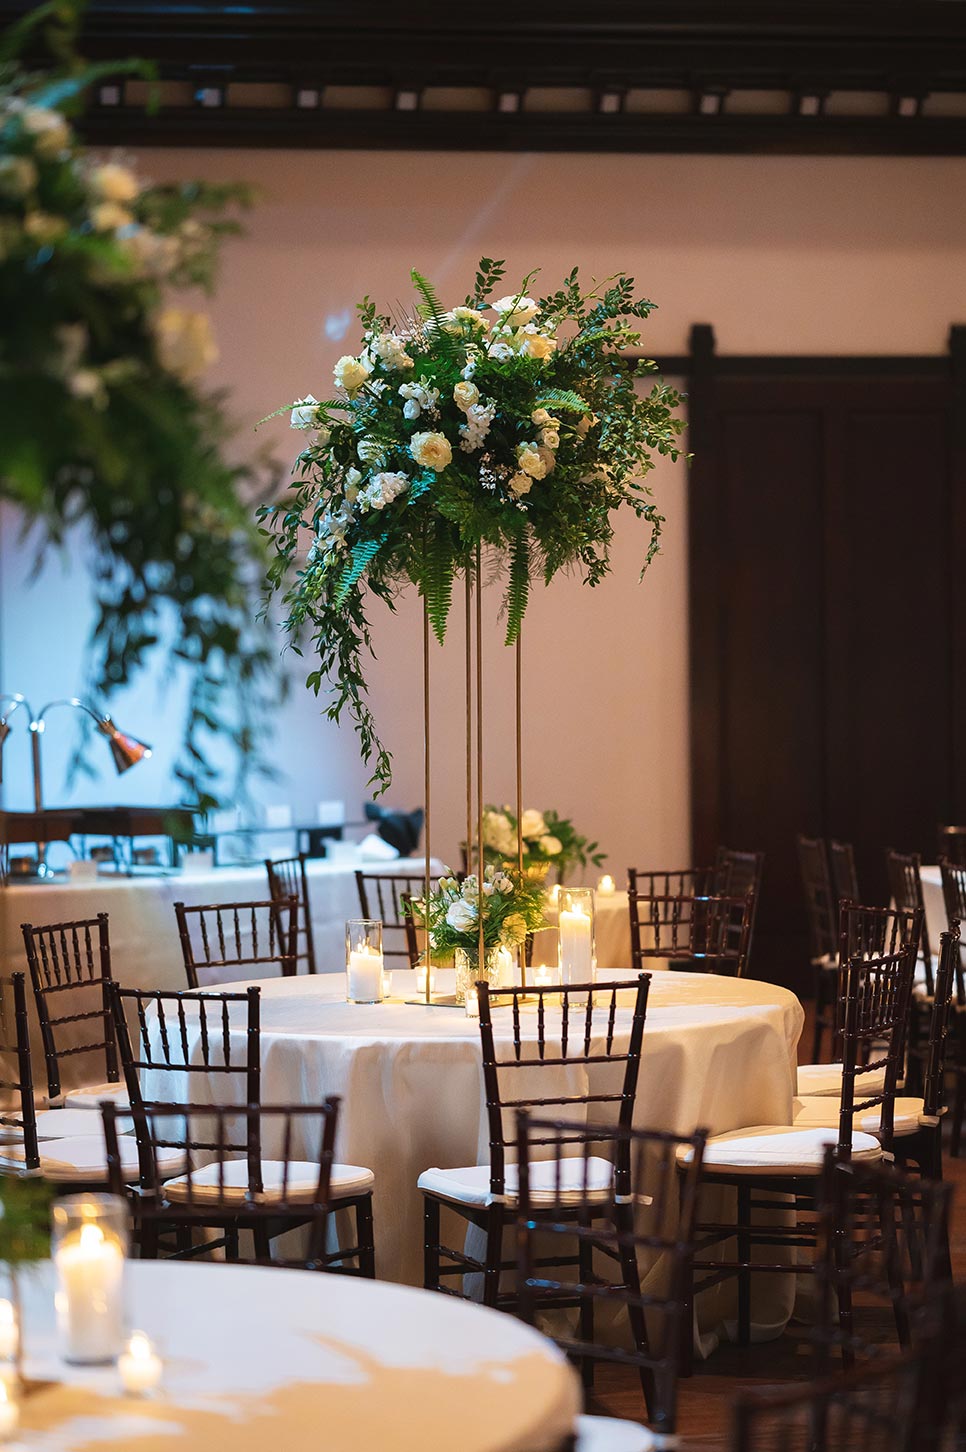 Reception with white linens elevated floral centerpieces and romantic pillar candles